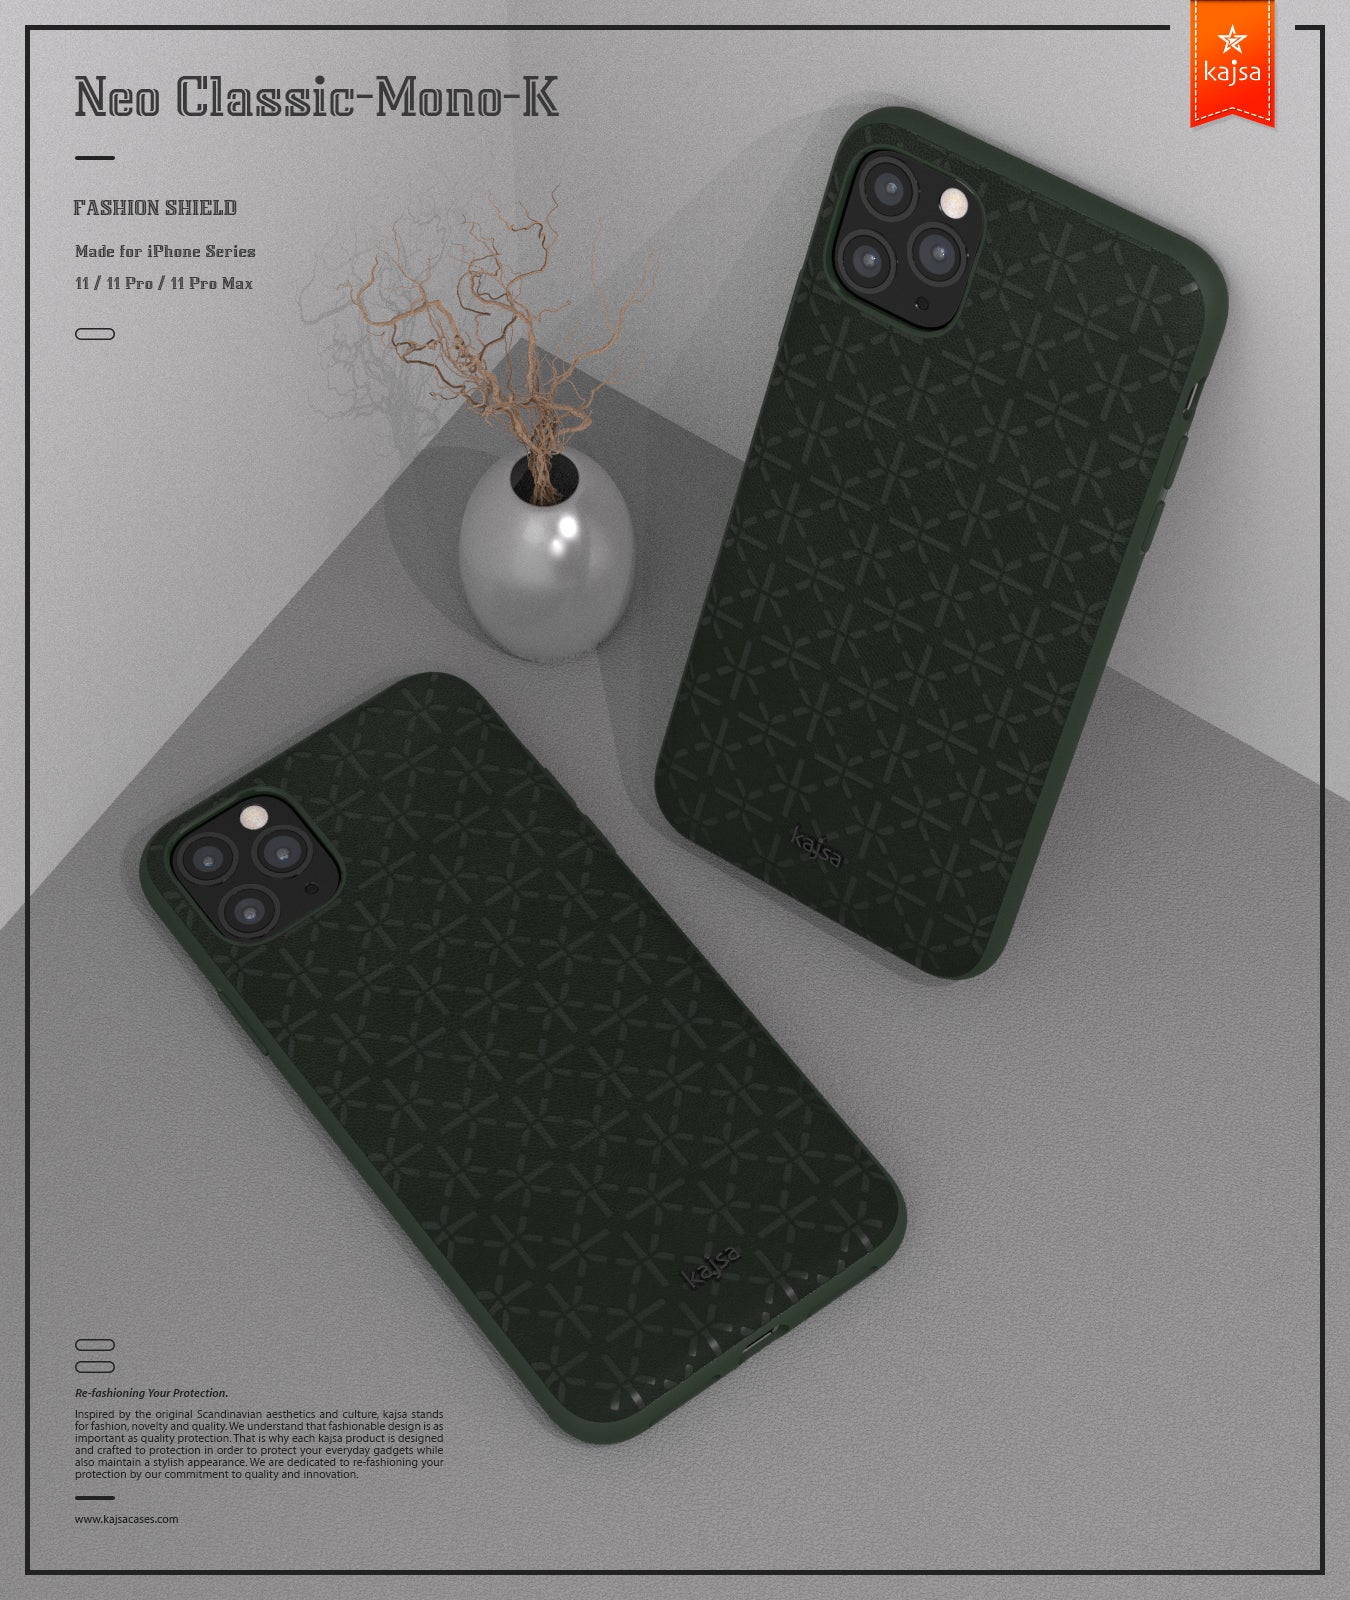 Neo Classic Collection - Mono K Back Case for iPhone 11 / 11 Pro / 11 Pro Max-Phone Case- phone case - phone cases- phone cover- iphone cover- iphone case- iphone cases- leather case- leather cases- DIYCASE - custom case - leather cover - hand strap case - croco pattern case - snake pattern case - carbon fiber phone case - phone case brand - unique phone case - high quality - phone case brand - protective case - buy phone case hong kong - online buy phone case - iphone‎手機殼 - 客製化手機殼 - samsung ‎手機殼 - 香港手機殼 - 